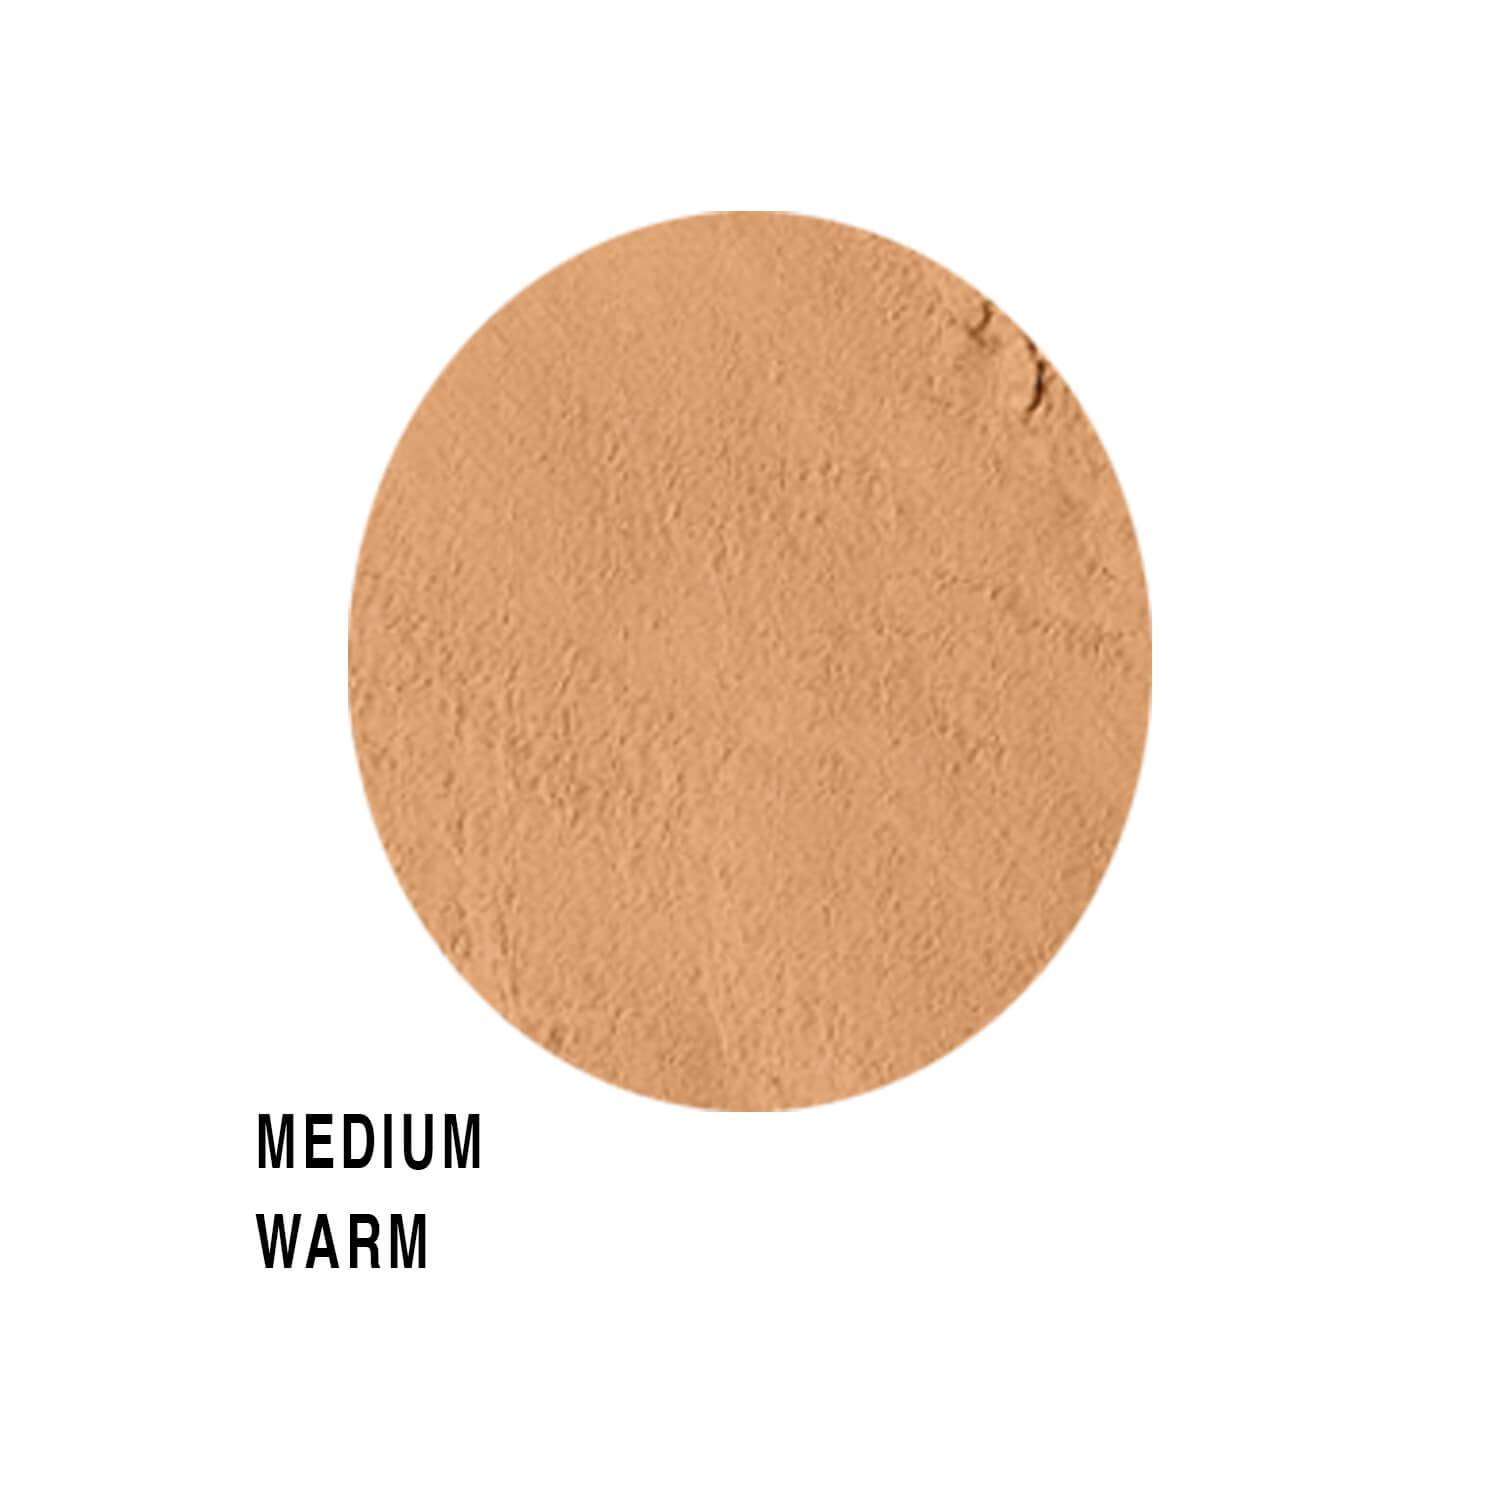 ulta makeup foundation medium warm swatch available at heygirl.pk for delivery in Pakistan